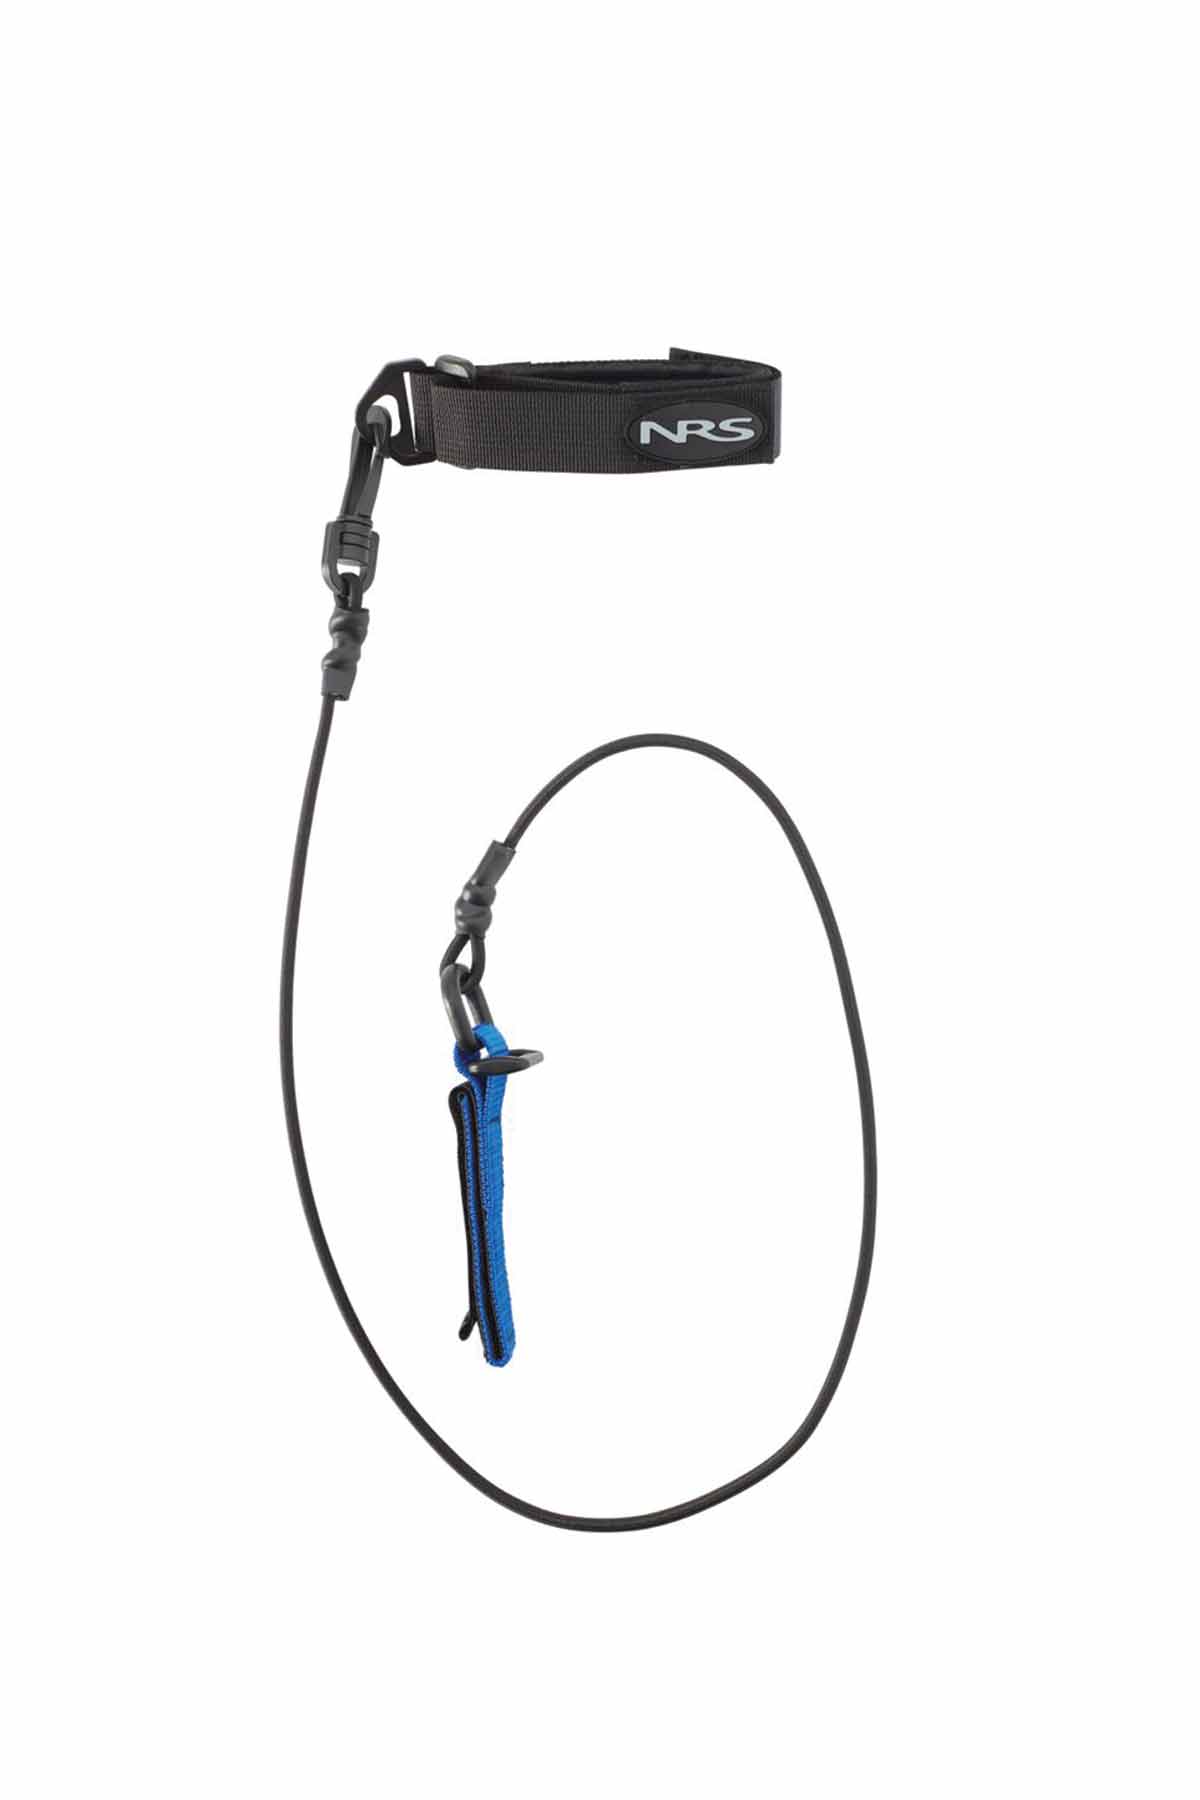 NRS Paddle Leash Bungee